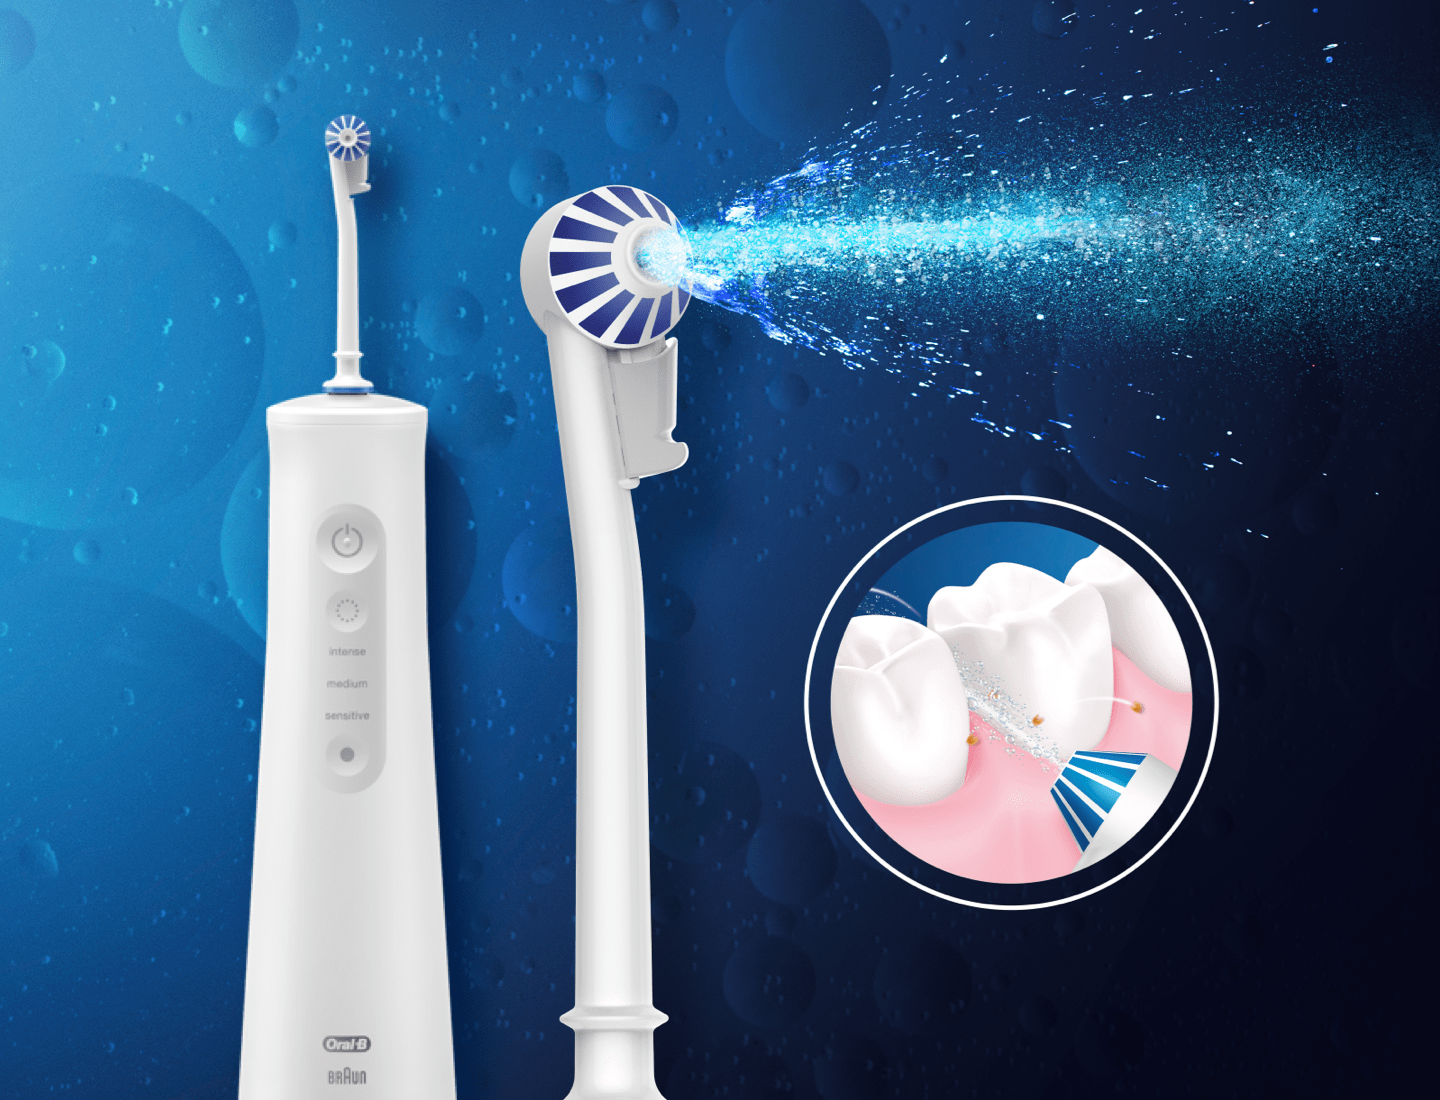 SHOP FOR ORAL-B WATER FLOSSER